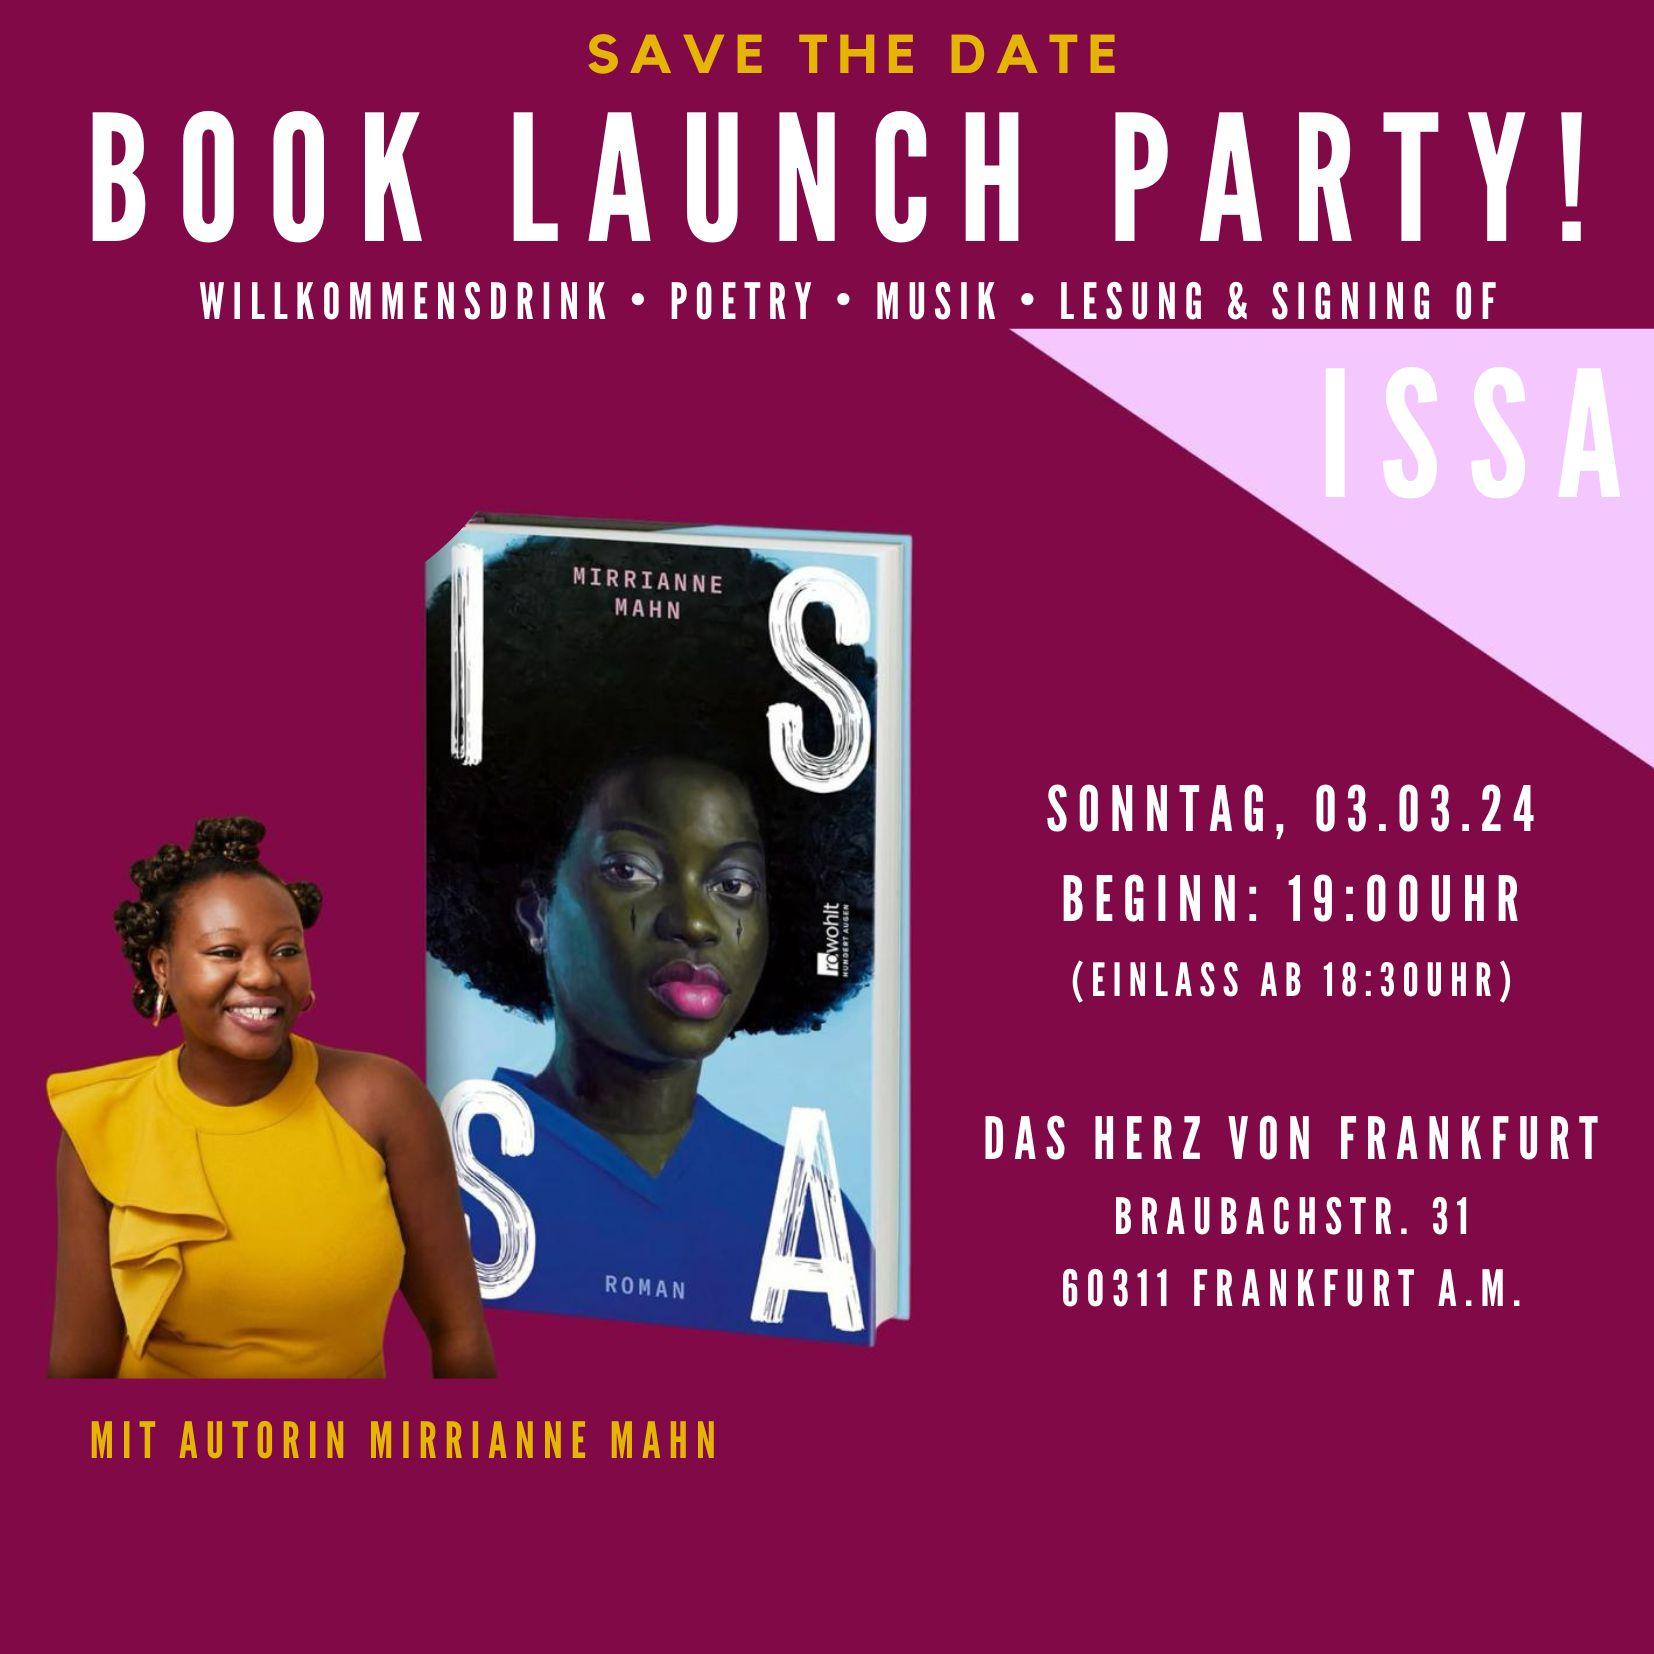 BOOK LAUNCH PARTY! WILLKOMMENSDRINK • POETRY • MUSIK • LESUNG & SIGNING OF ISSA